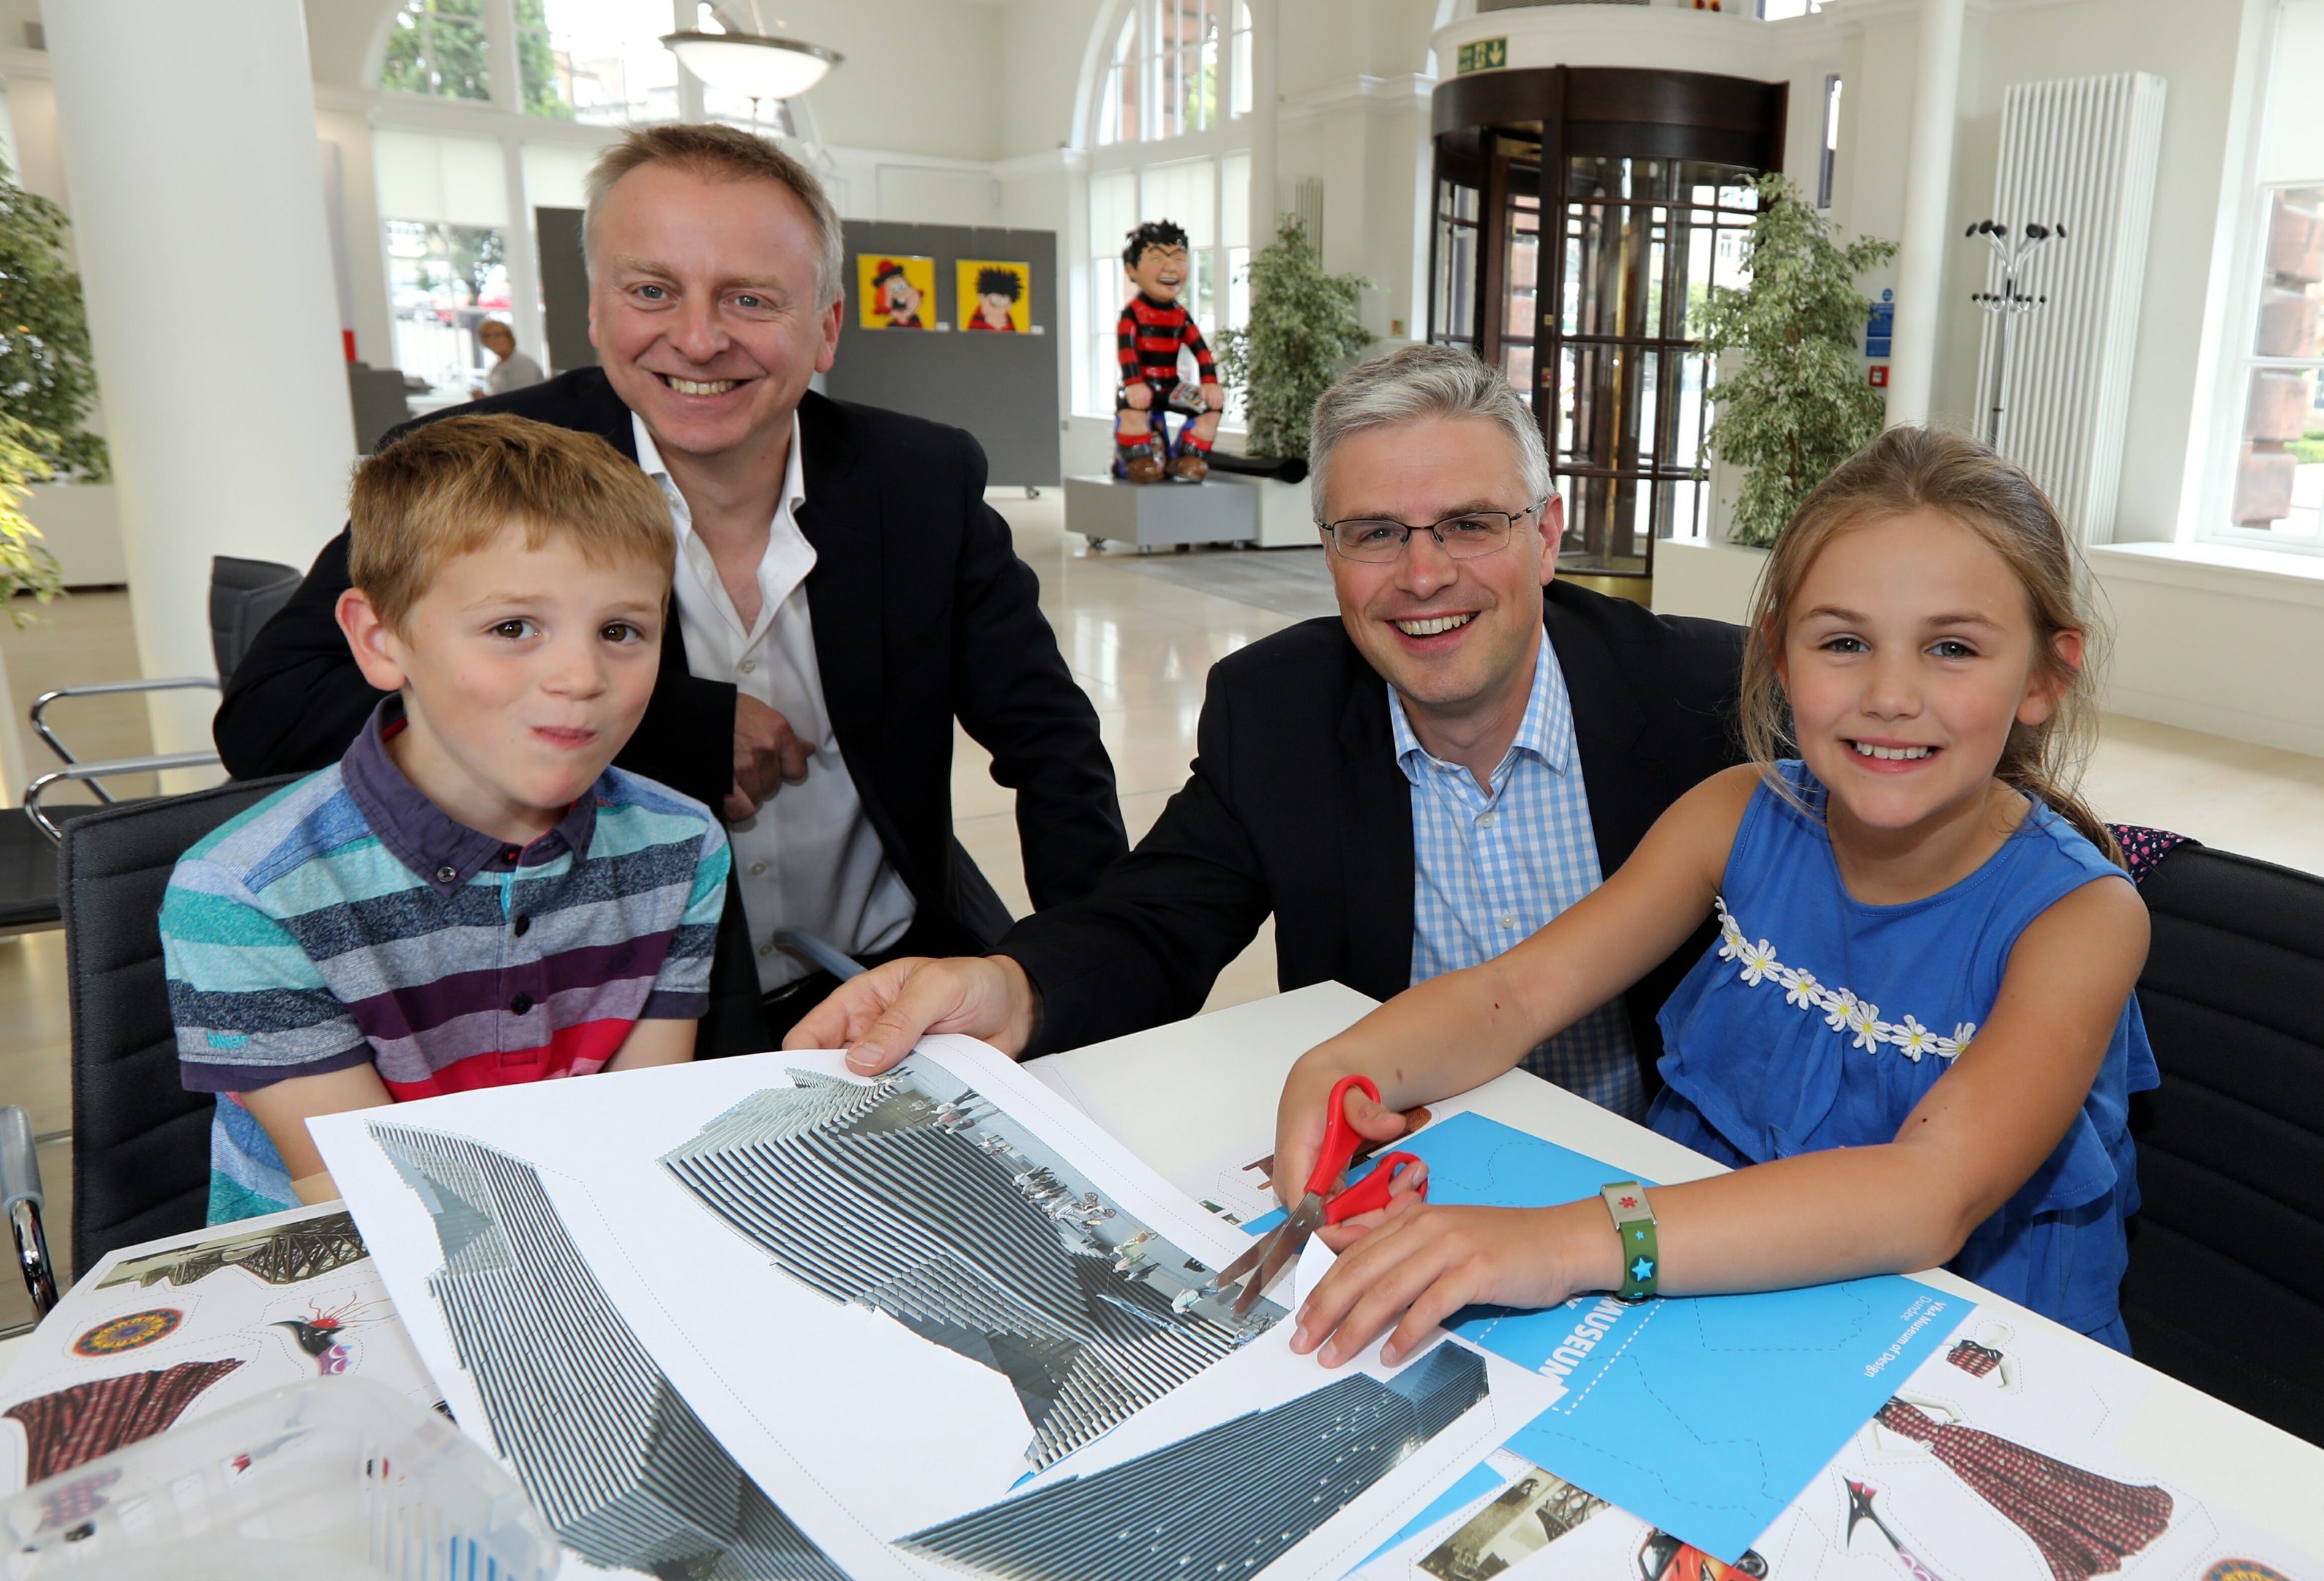 Philip Long and David Thomson helping Jamie and Emily Thomson with their pop-up books.